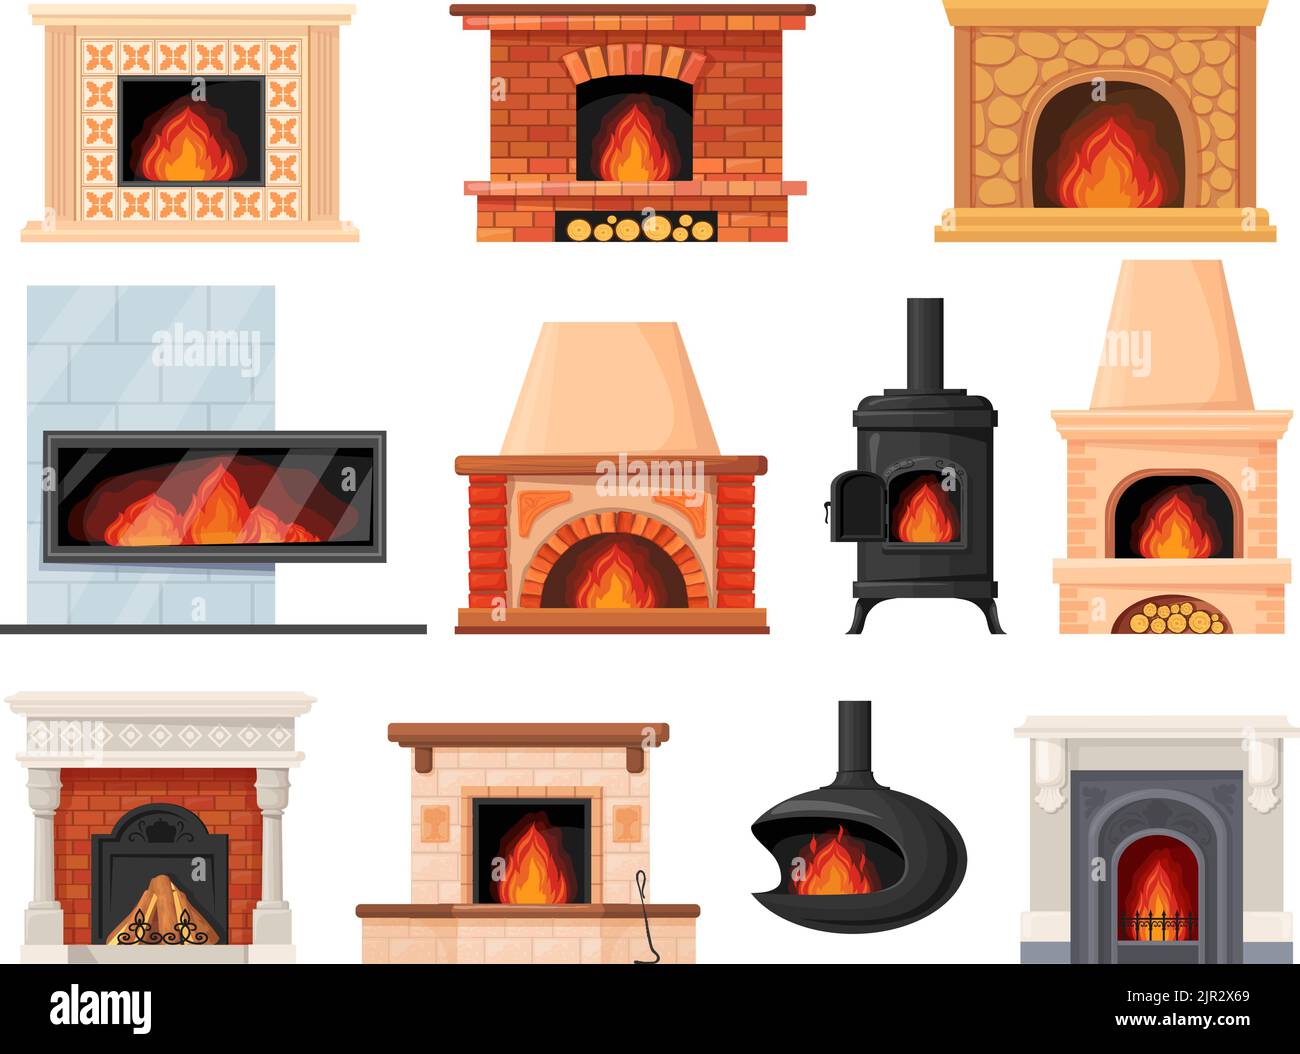 Cartoon fireplaces stoves. Fireplace chimney electric fire wood heat systems, cozy fireside classic decorated home hearth iron stone contemporary heater, neat vector illustration of electric fireplace Stock Vector